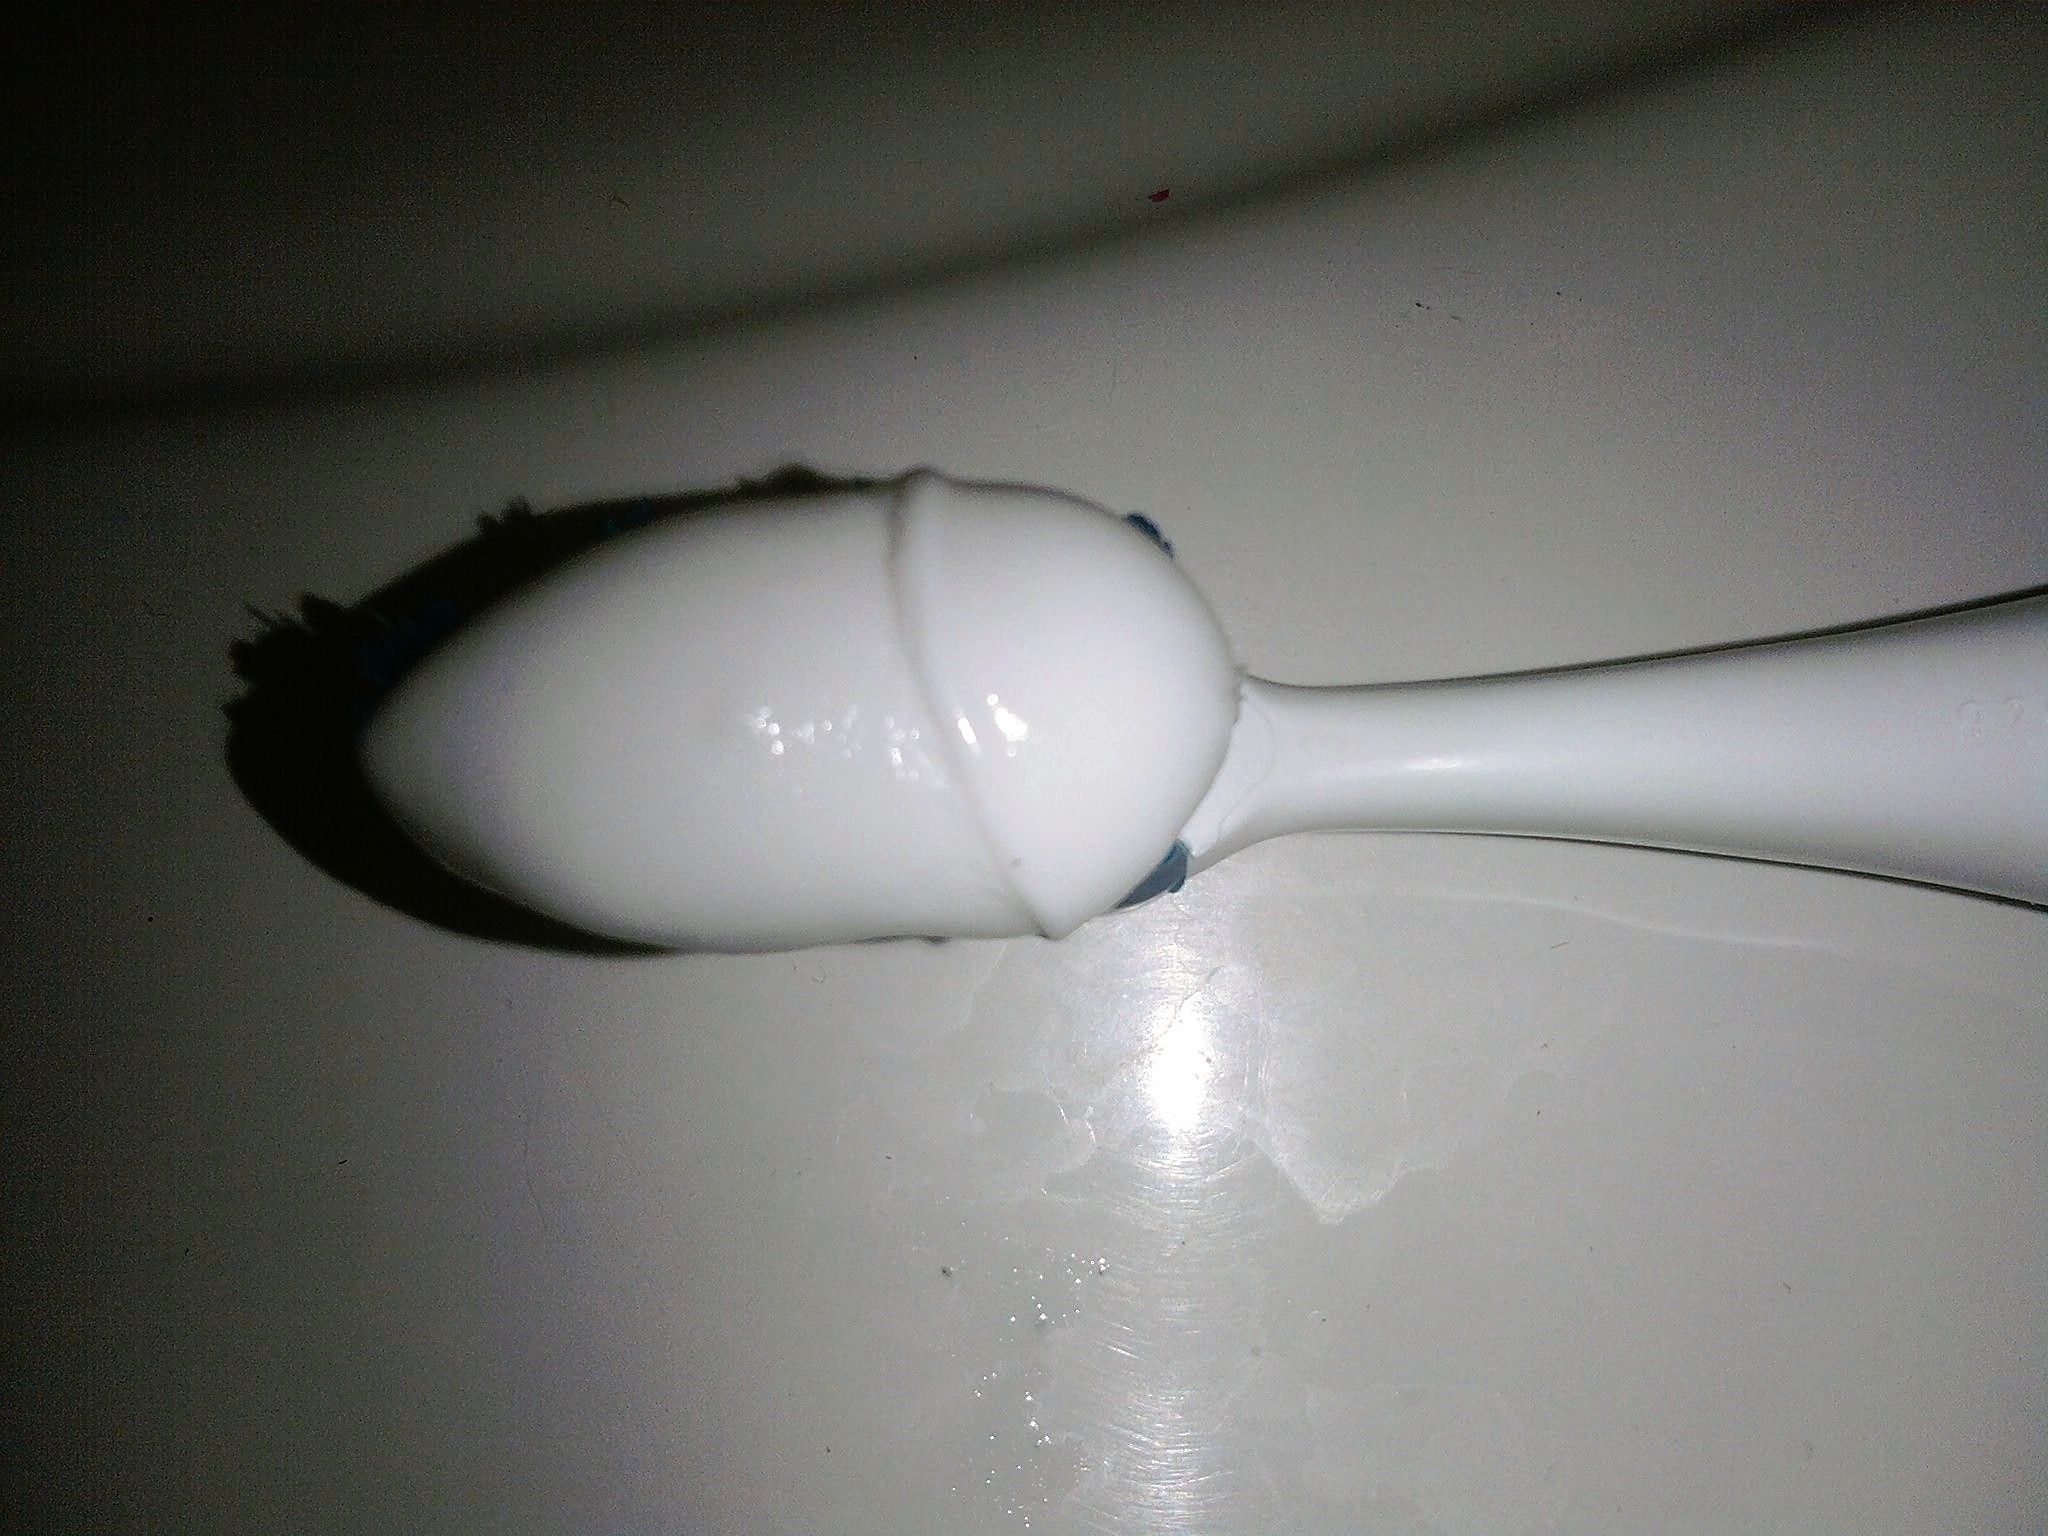 I knew it was going to be a bad start when your toothpaste comes out like this first thing in the morning. I laughed so hard I forgot to brush my teet